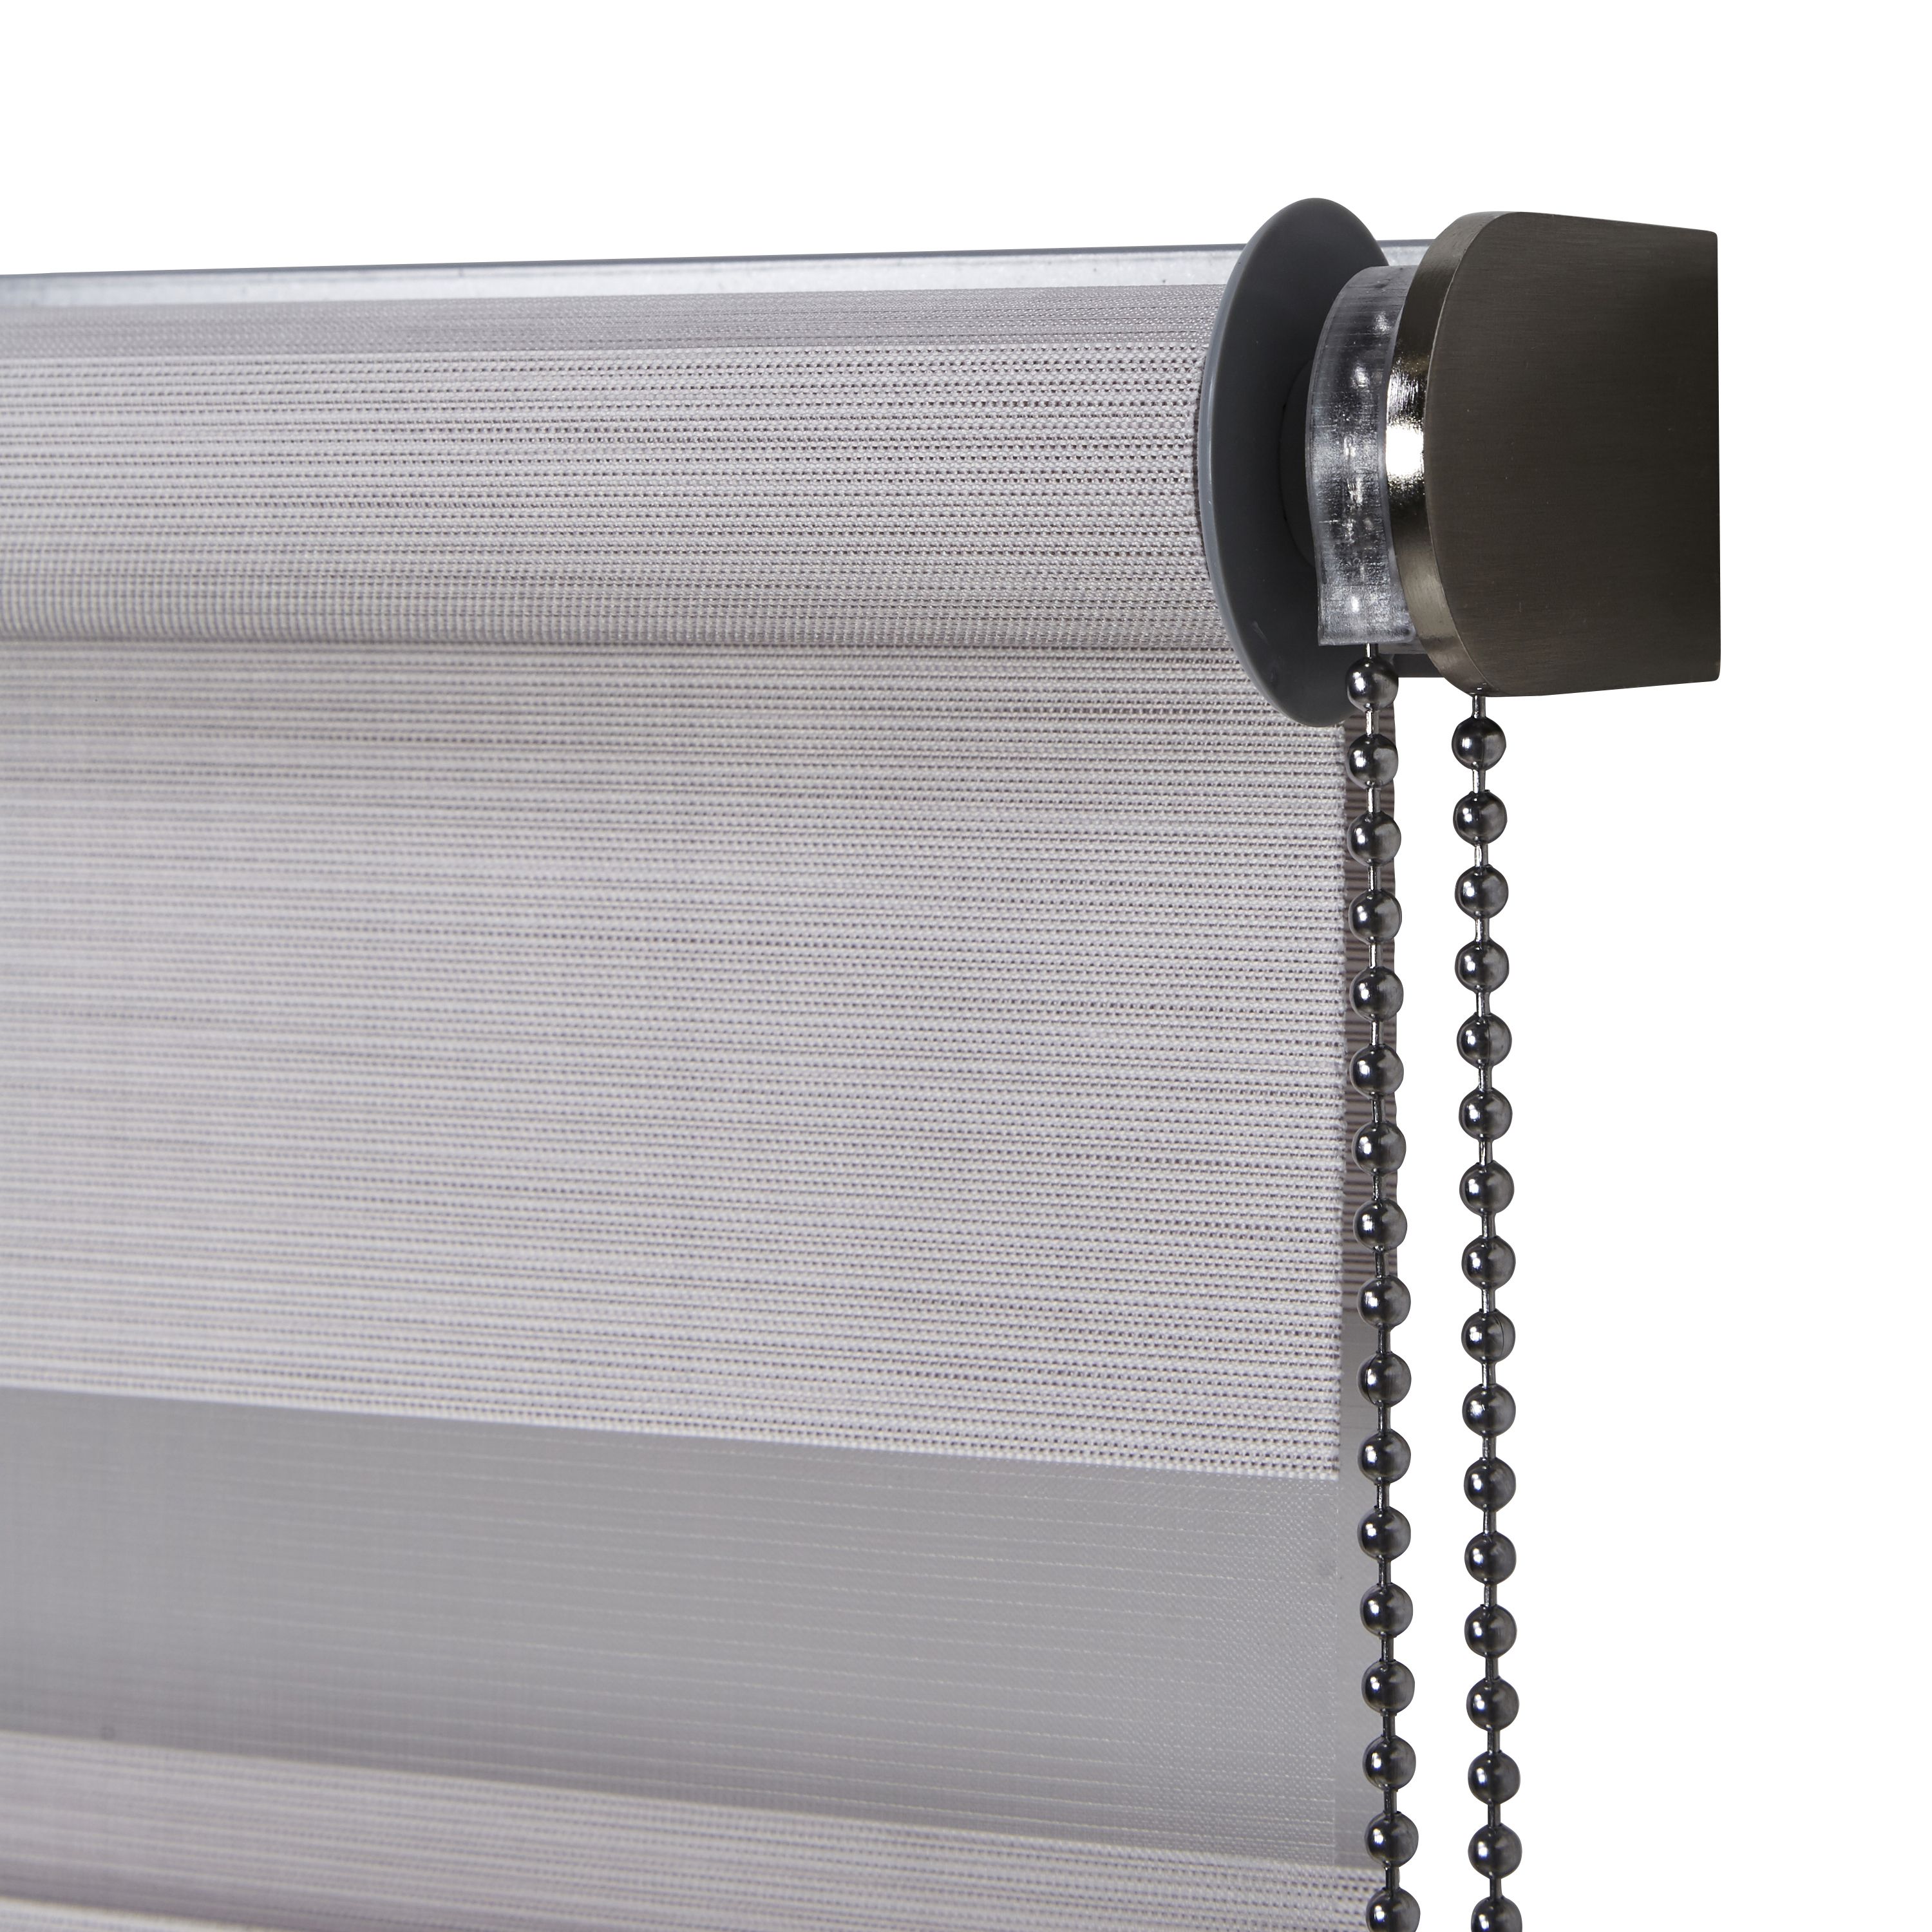 Kala Corded Natural Striped Day & night Roller blind (W)120cm (L)180cm